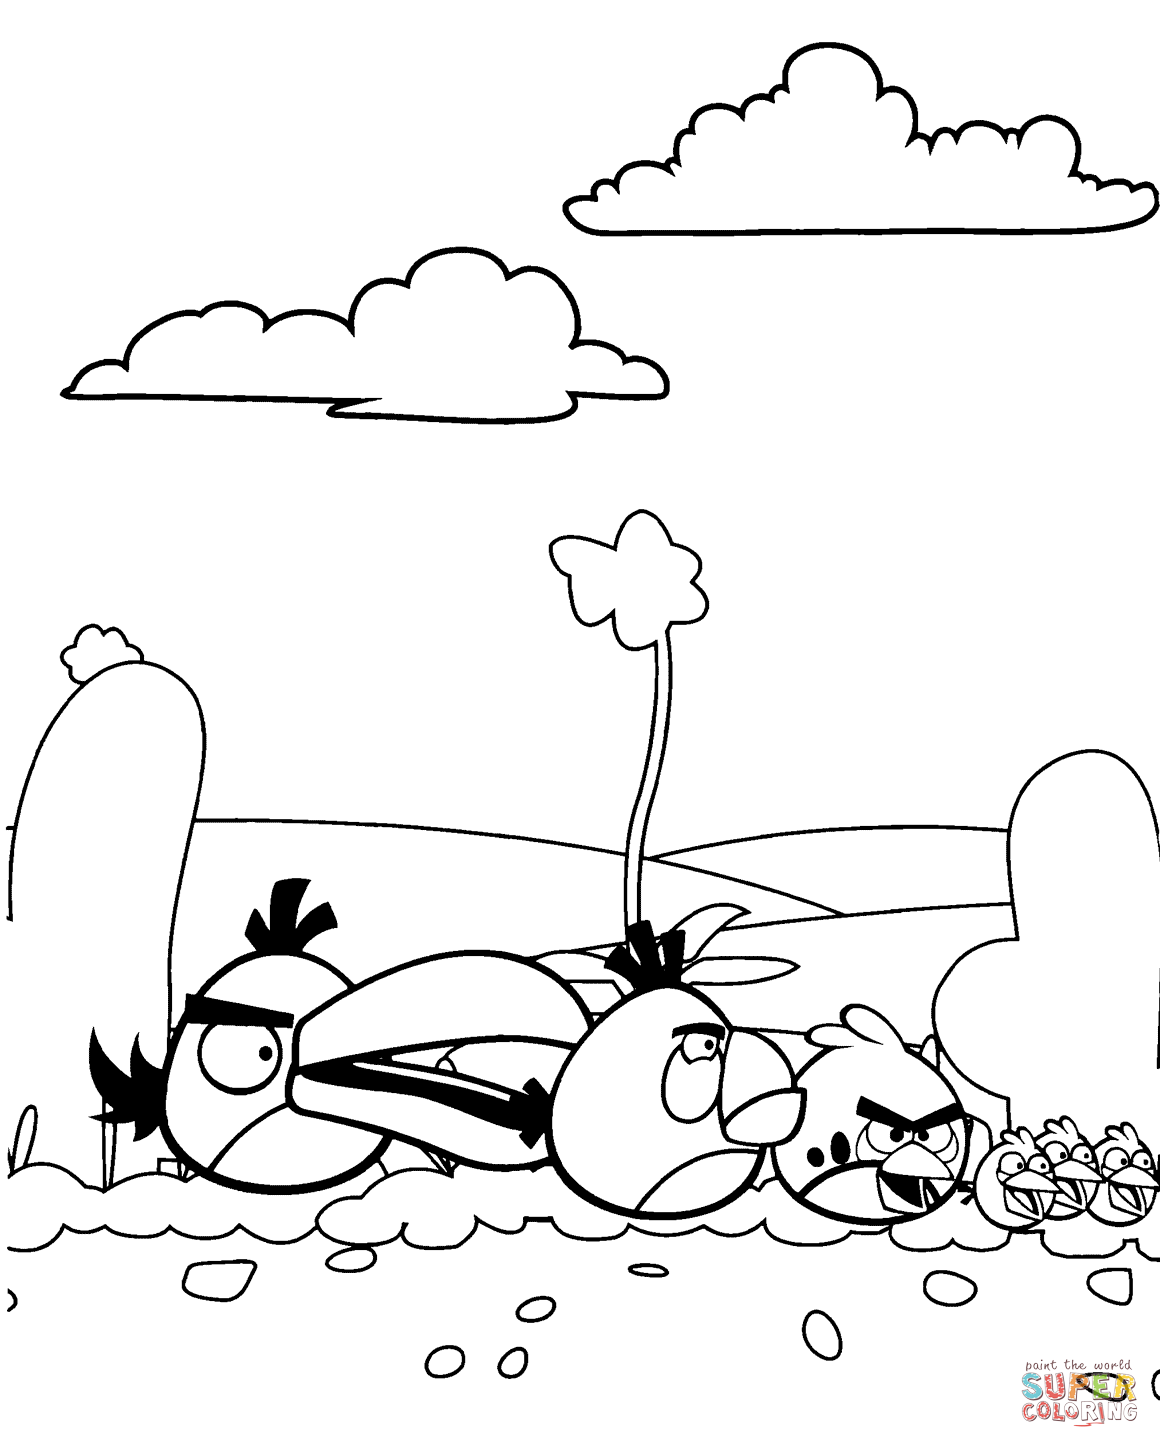 Angry birds flock in desert coloring page free printable coloring pages